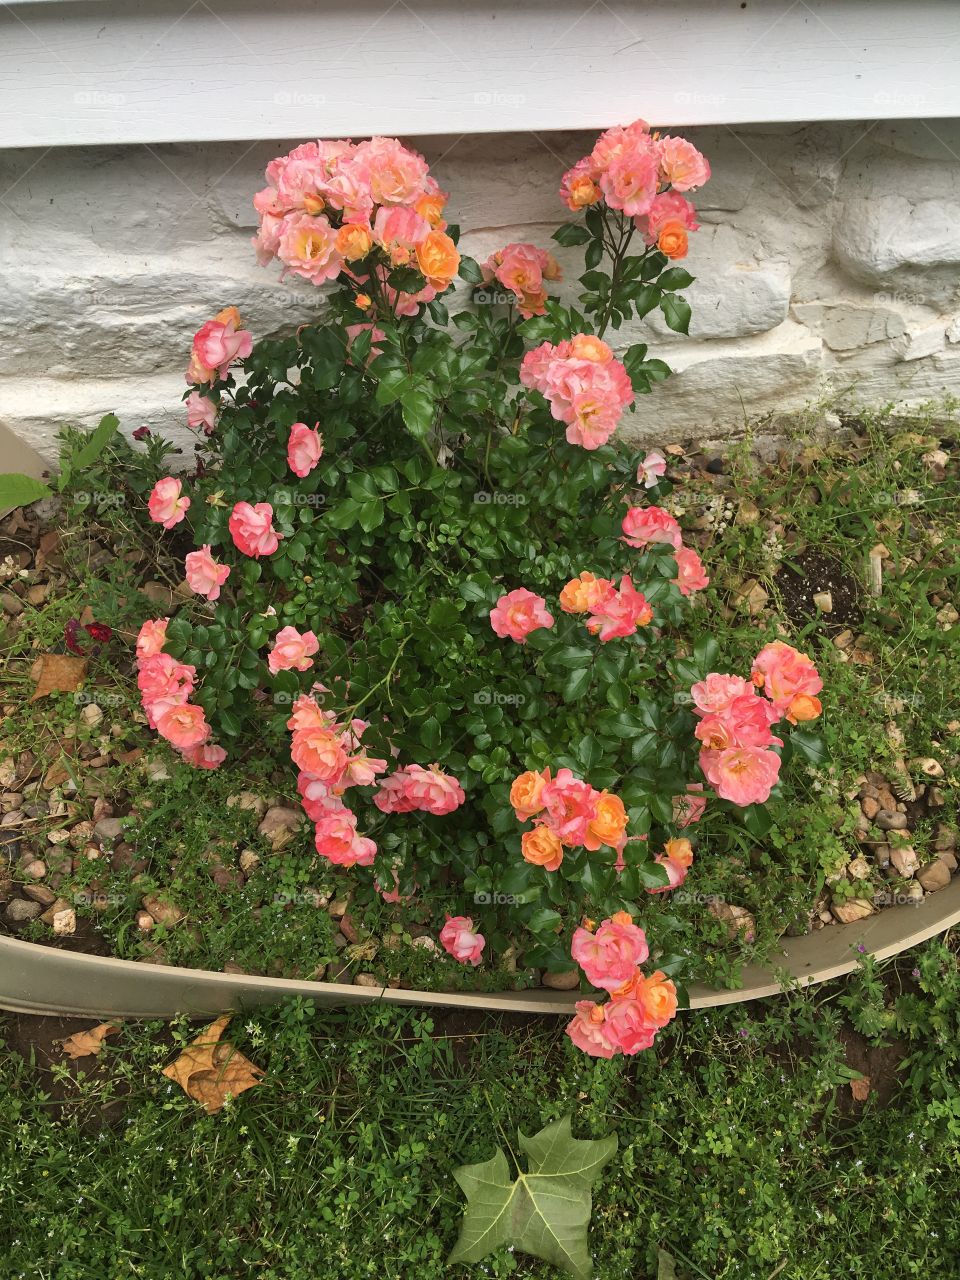 Planted last year and look at it now! My peach roses are going crazy in one of my flower gardens.